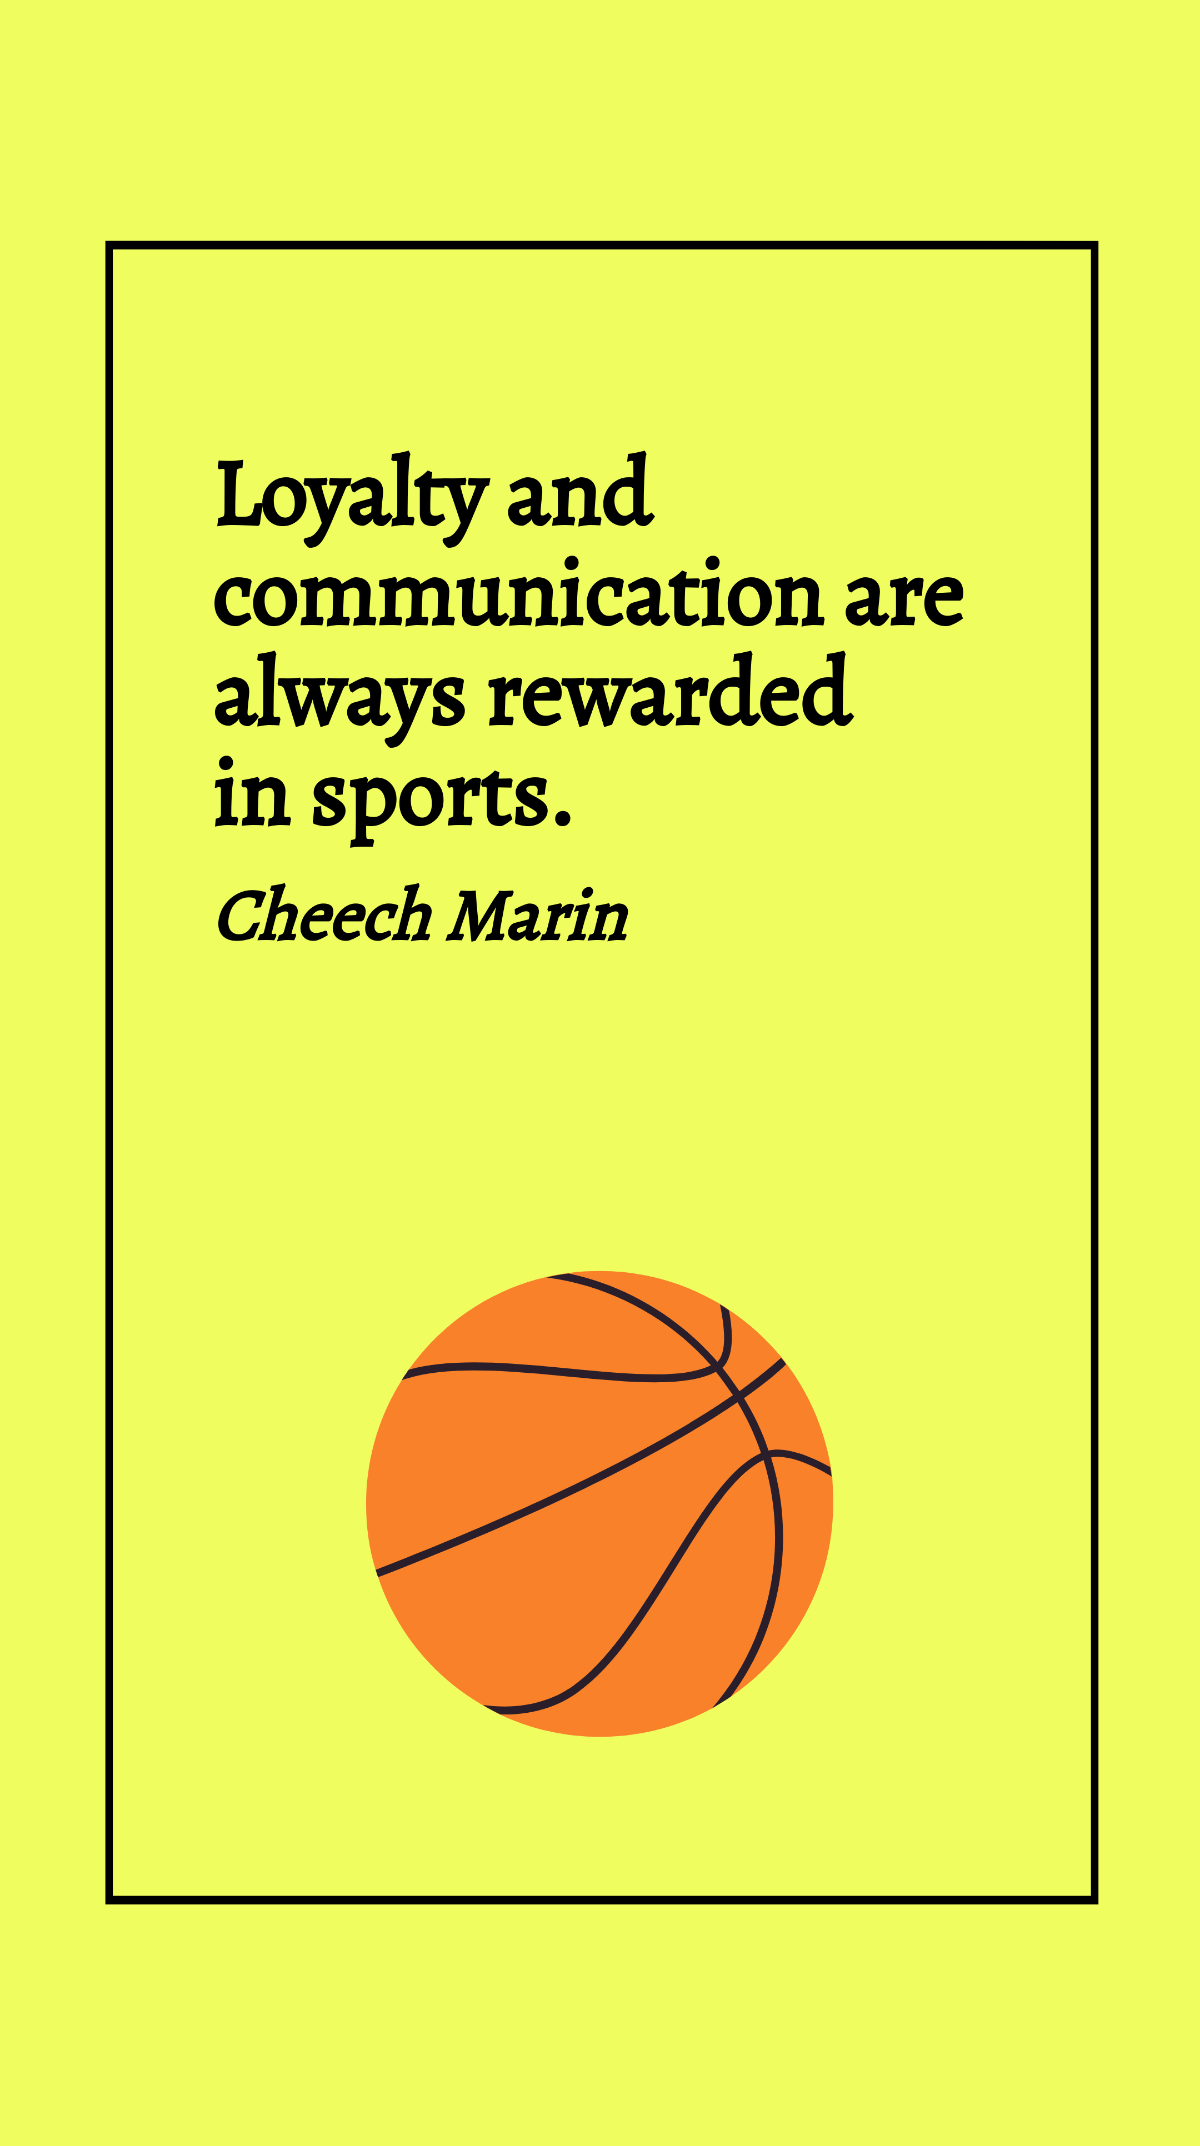 Cheech Marin - Loyalty and communication are always rewarded in sports. Template